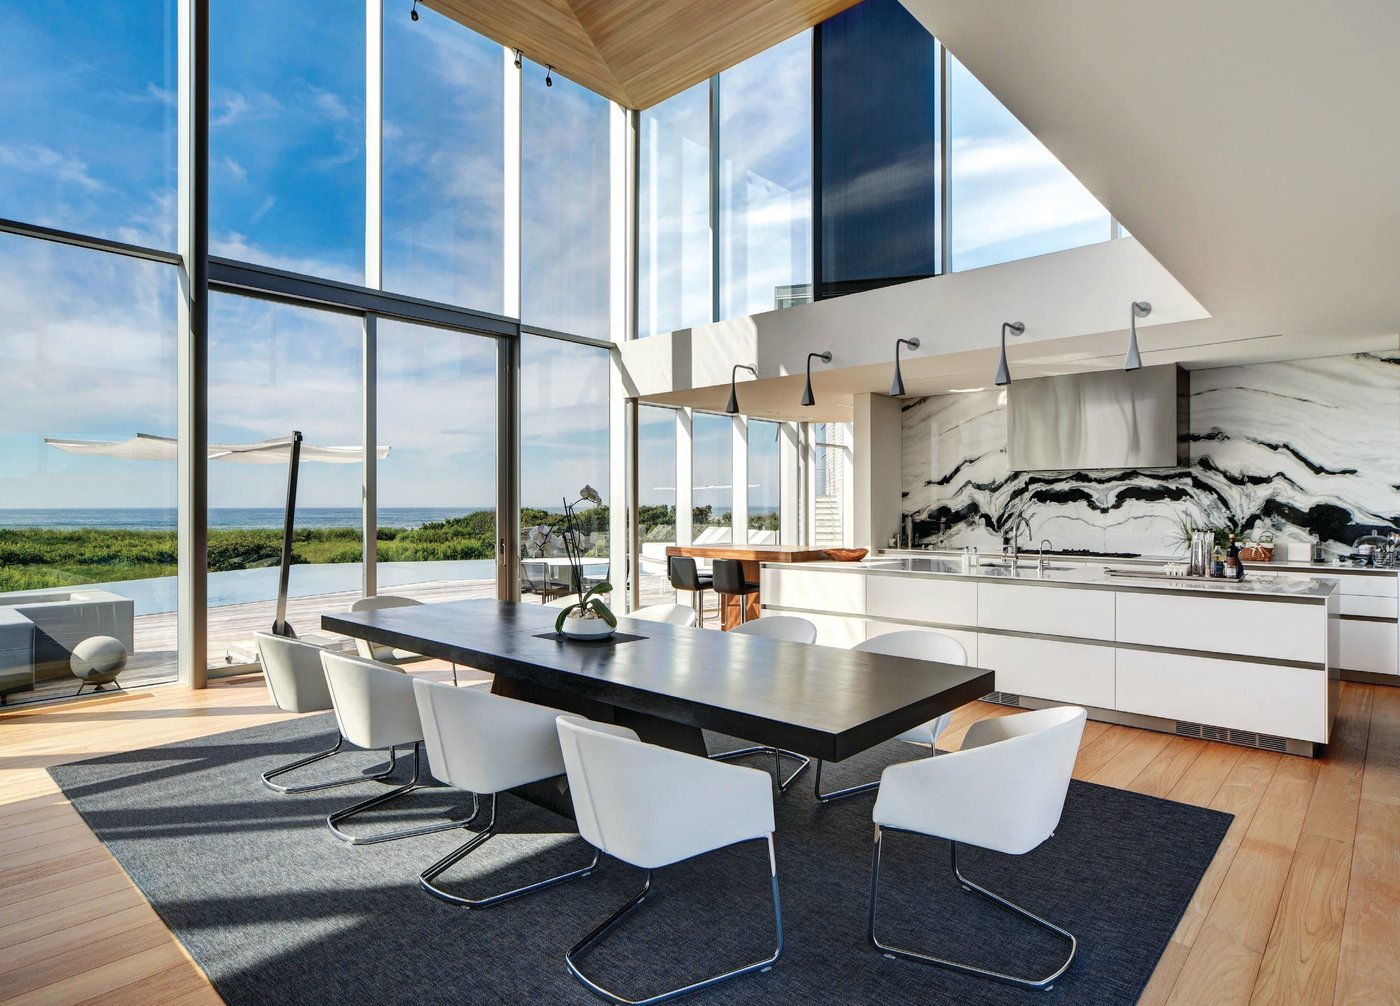 115 Beach Lane is one of only seven oceanfront homes in Wainscott. PHOTO COURTESY OF THE CORCORAN GROUP